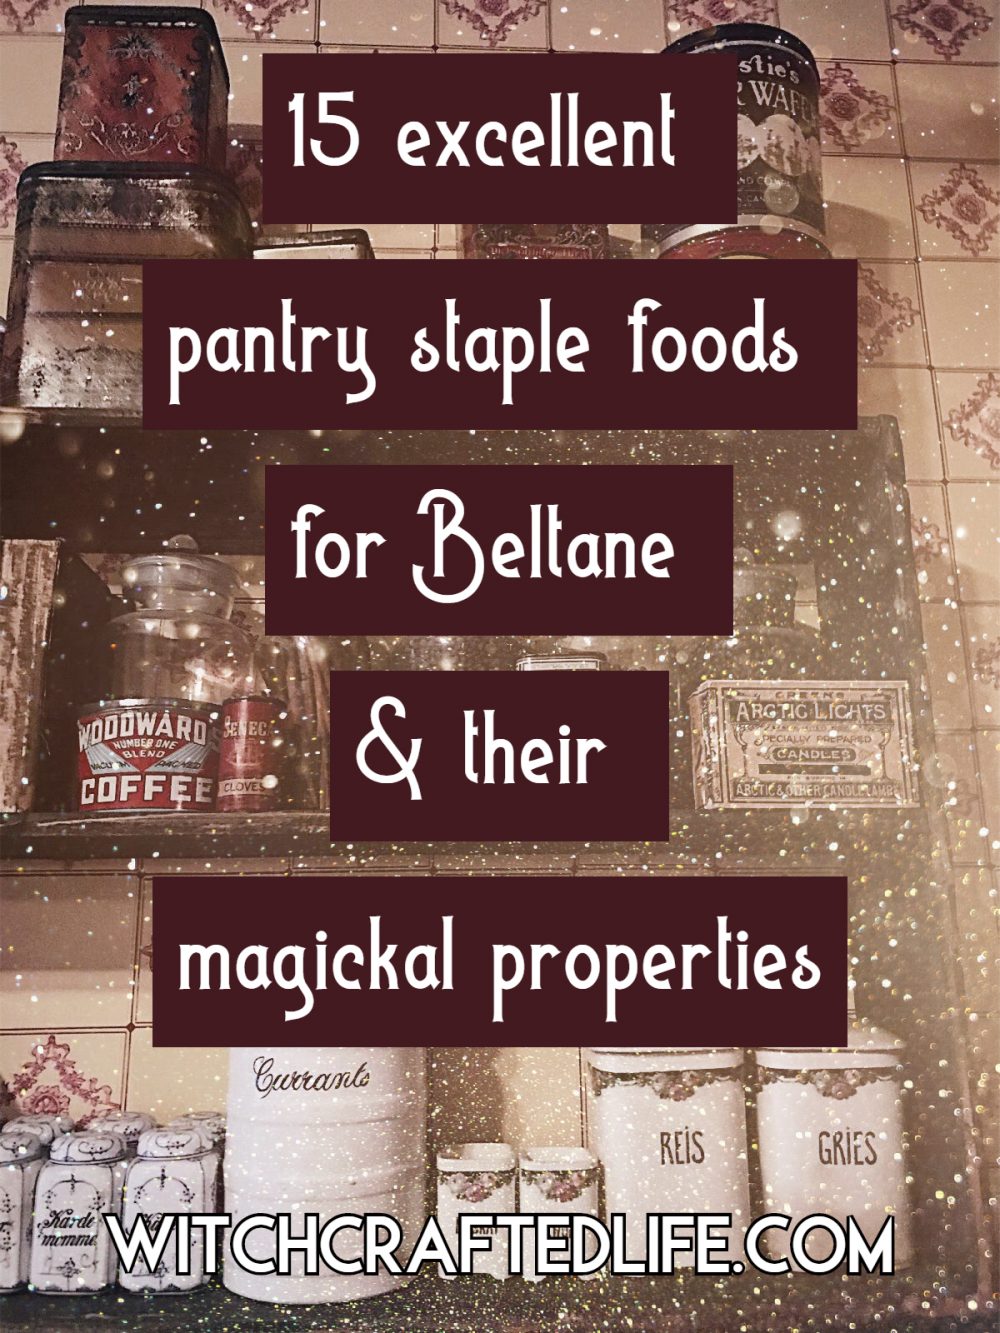 15 excellent pantry staple foods for Beltane and their magickal properties